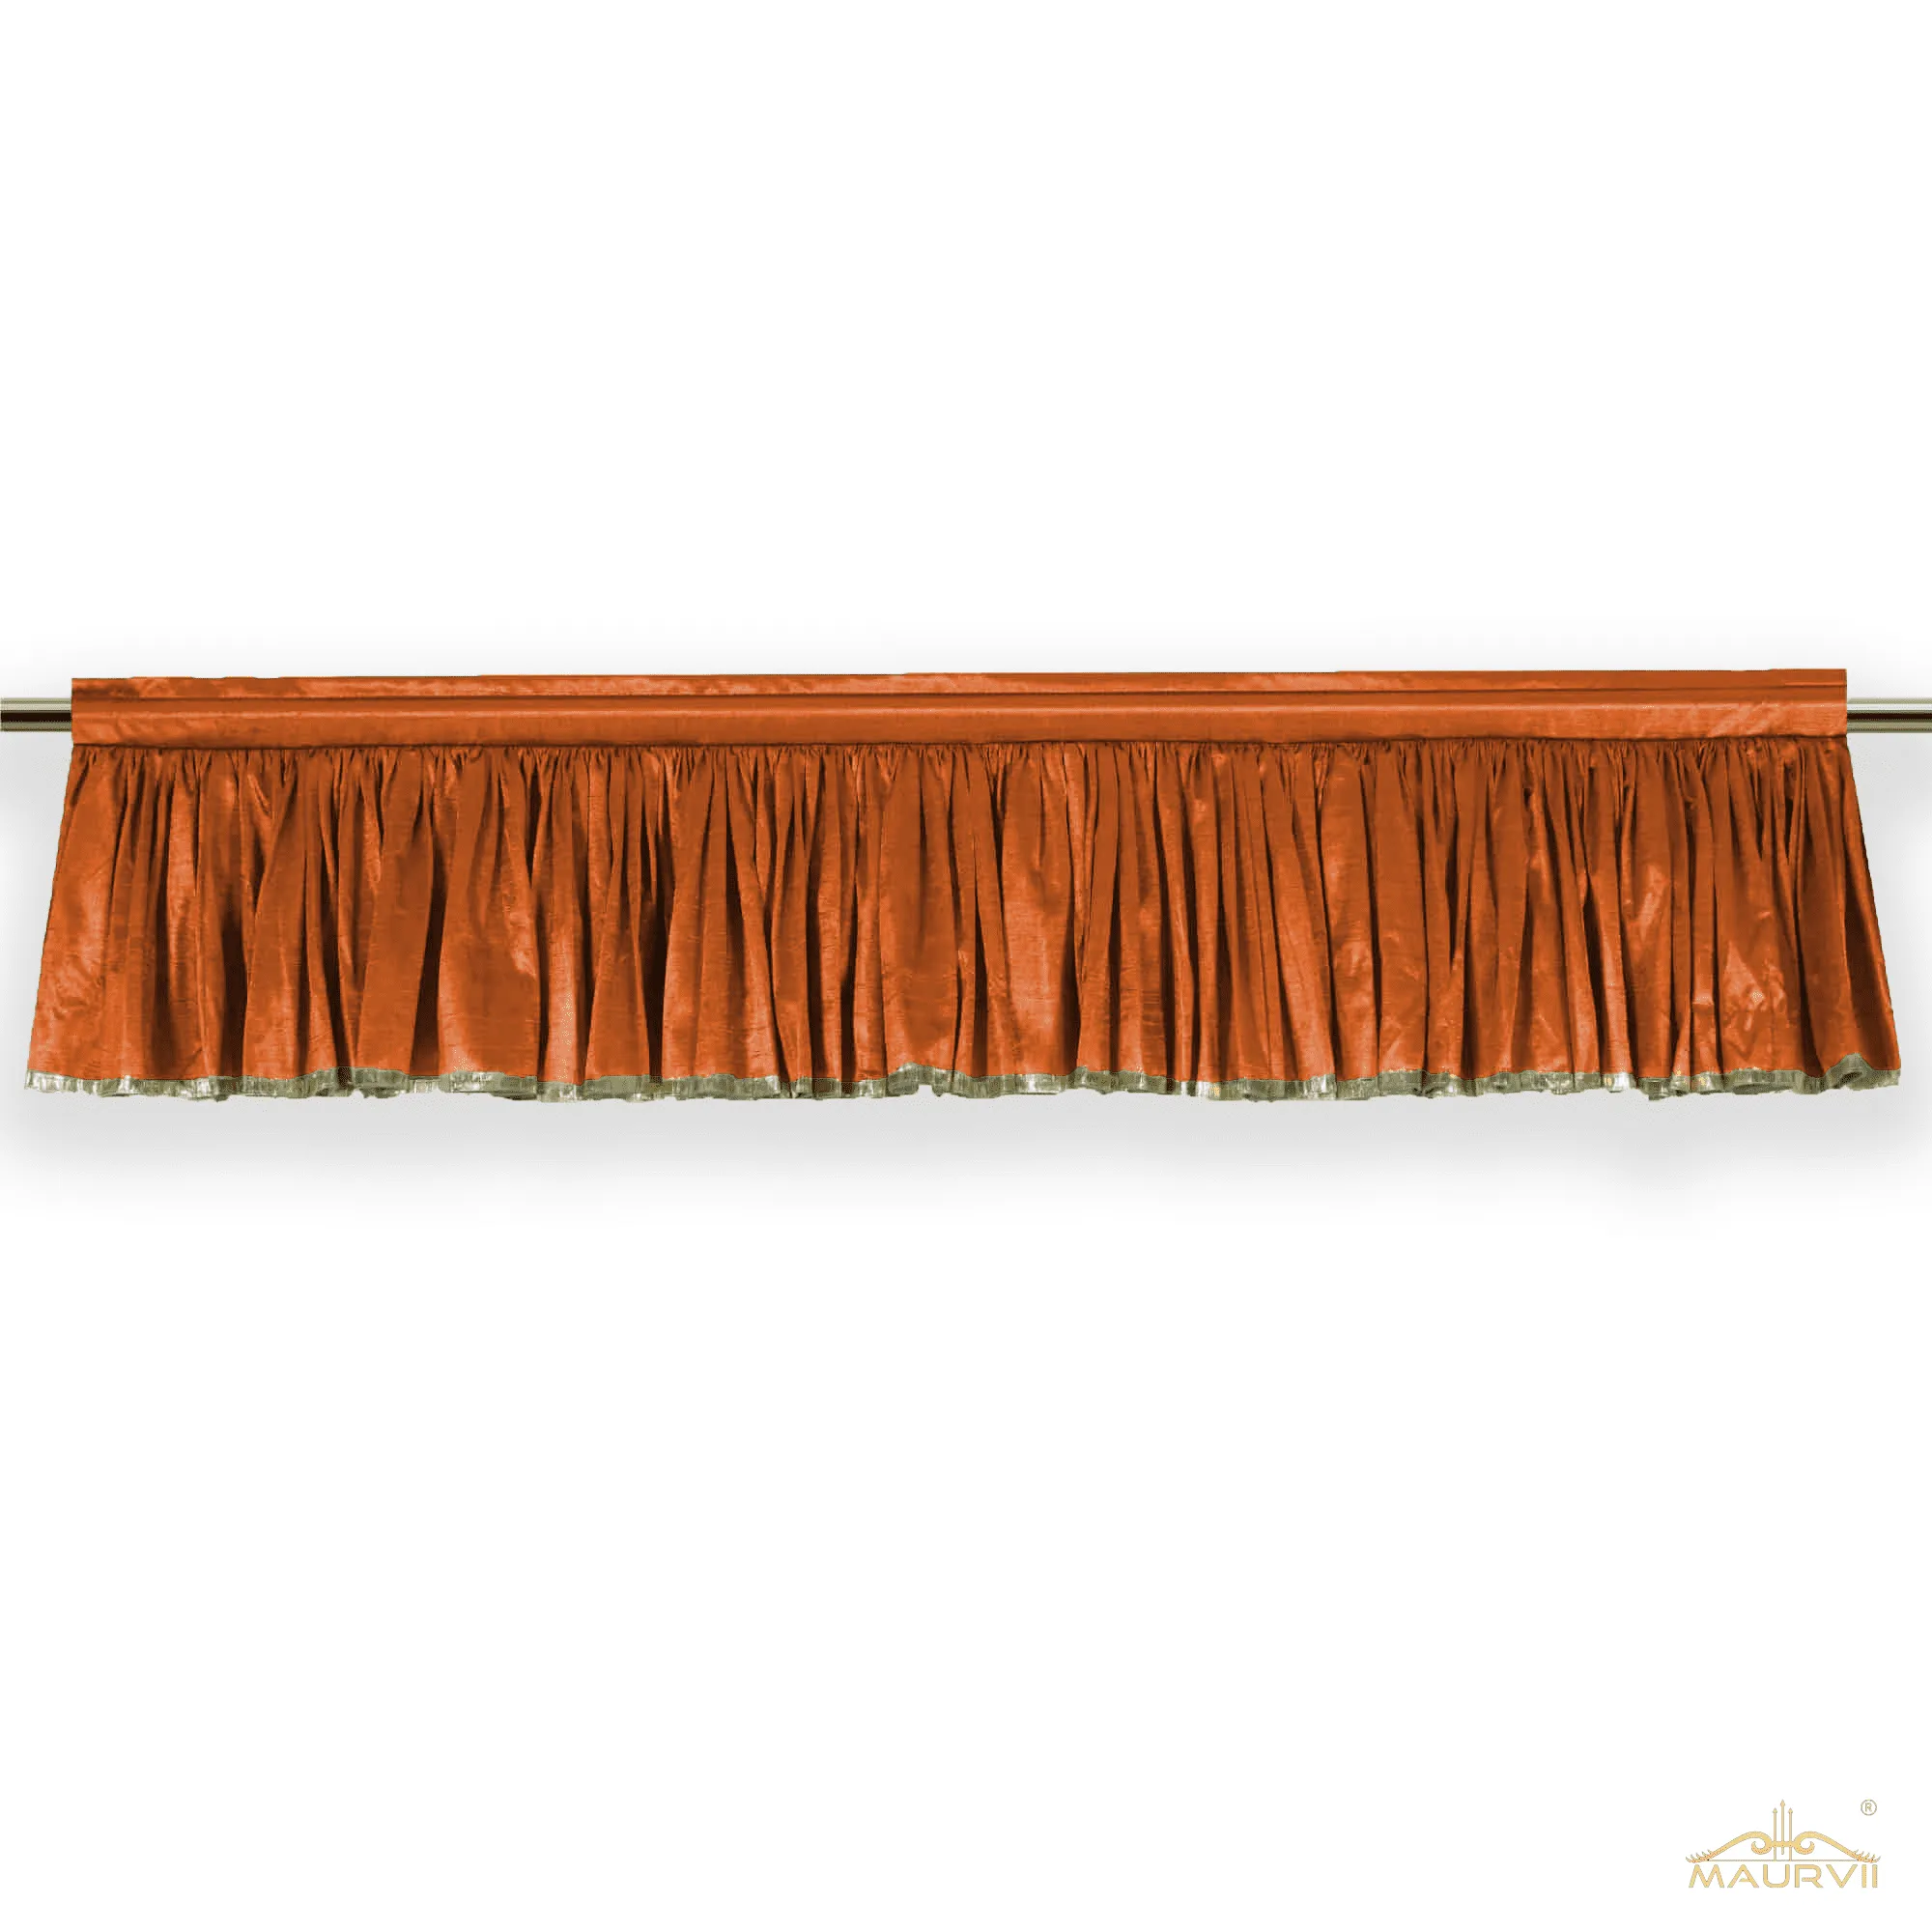 Pale Green Pleated Valance with golden trim at bottom